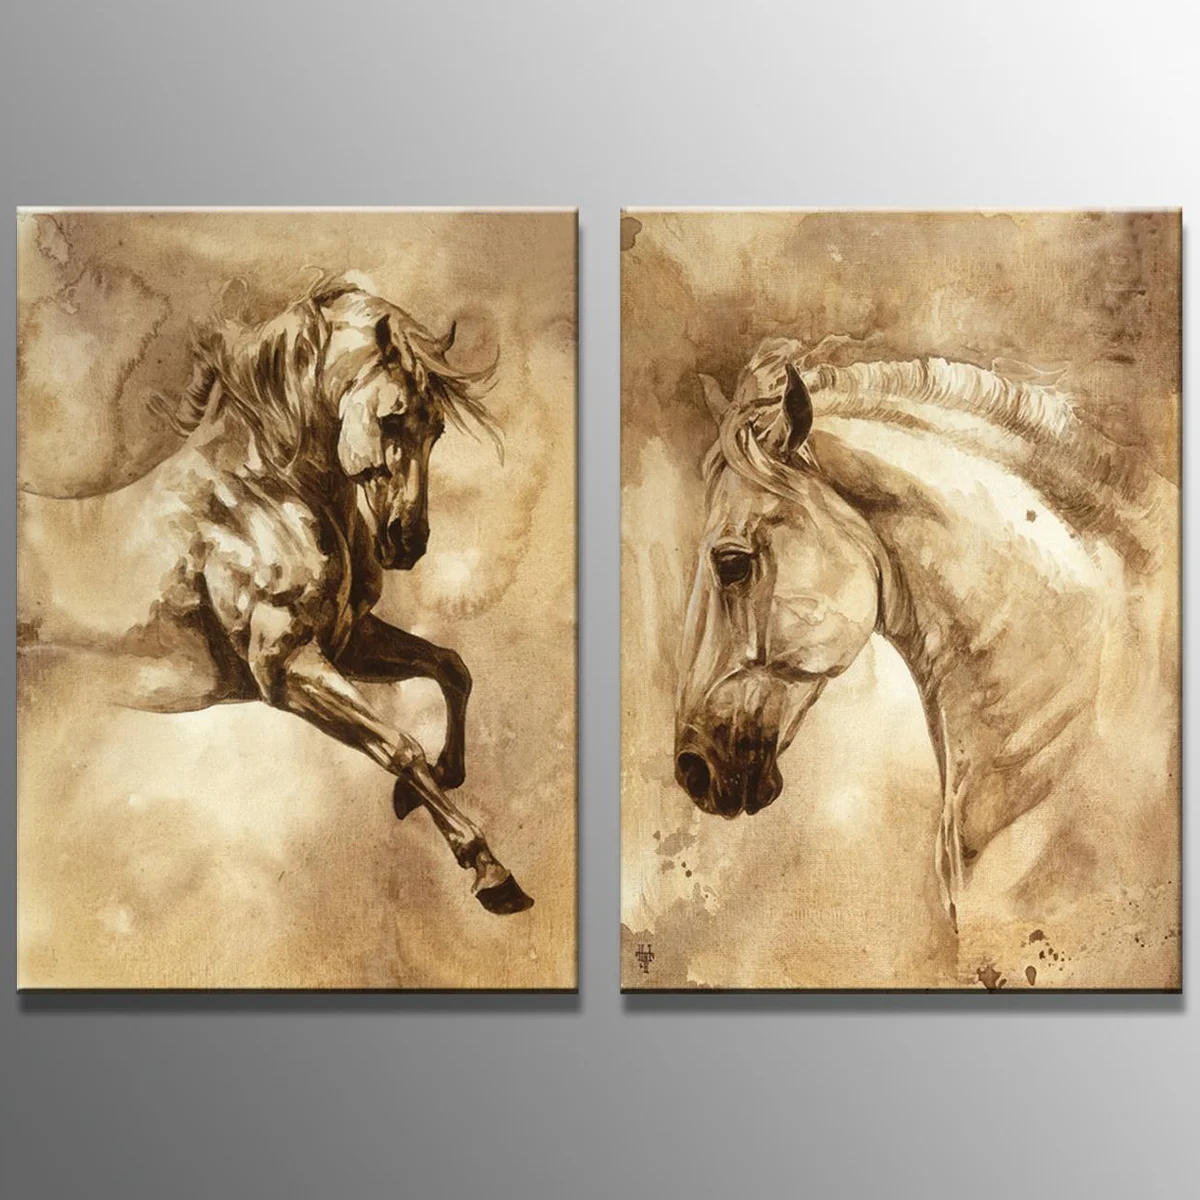 

Unframed Two Panels on Canvas Wall Modern Oil Paintings Decorative Abstract Horse Pictures for Home Living Room Bedroom